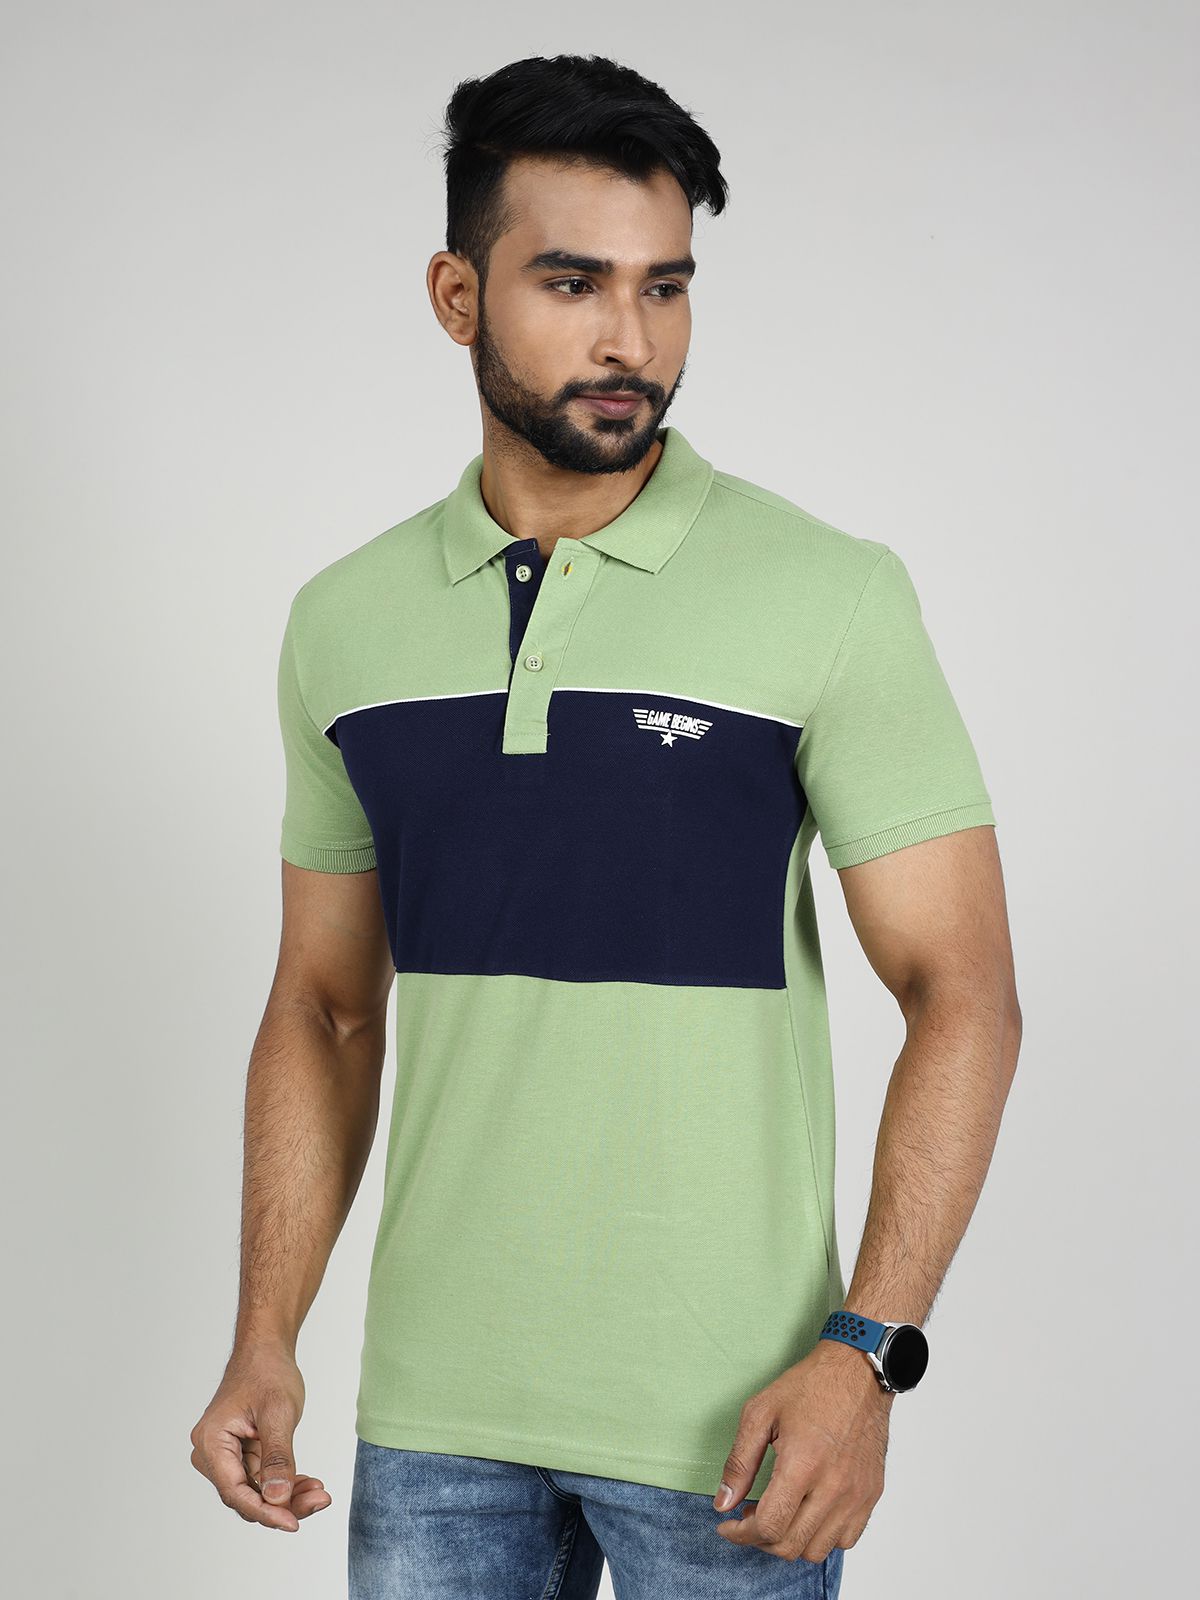     			GAME BEGINS Cotton Slim Fit Colorblock Half Sleeves Men's Polo T Shirt - Green ( Pack of 1 )